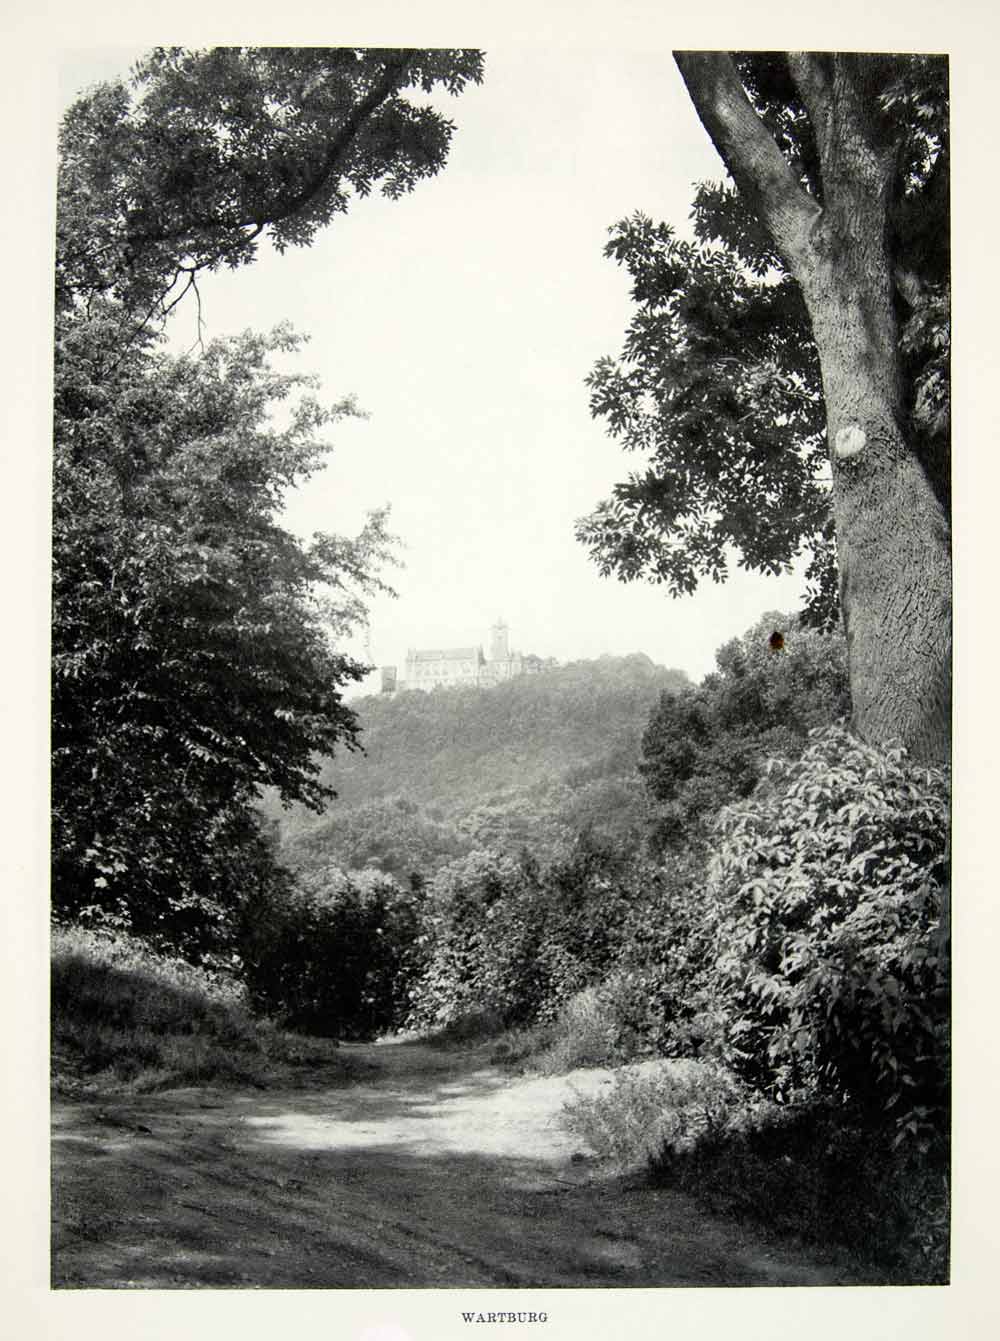 1952 Rotogravure Wartburg Germany Rural Forest Castle Thuringia Feudal XGIC3